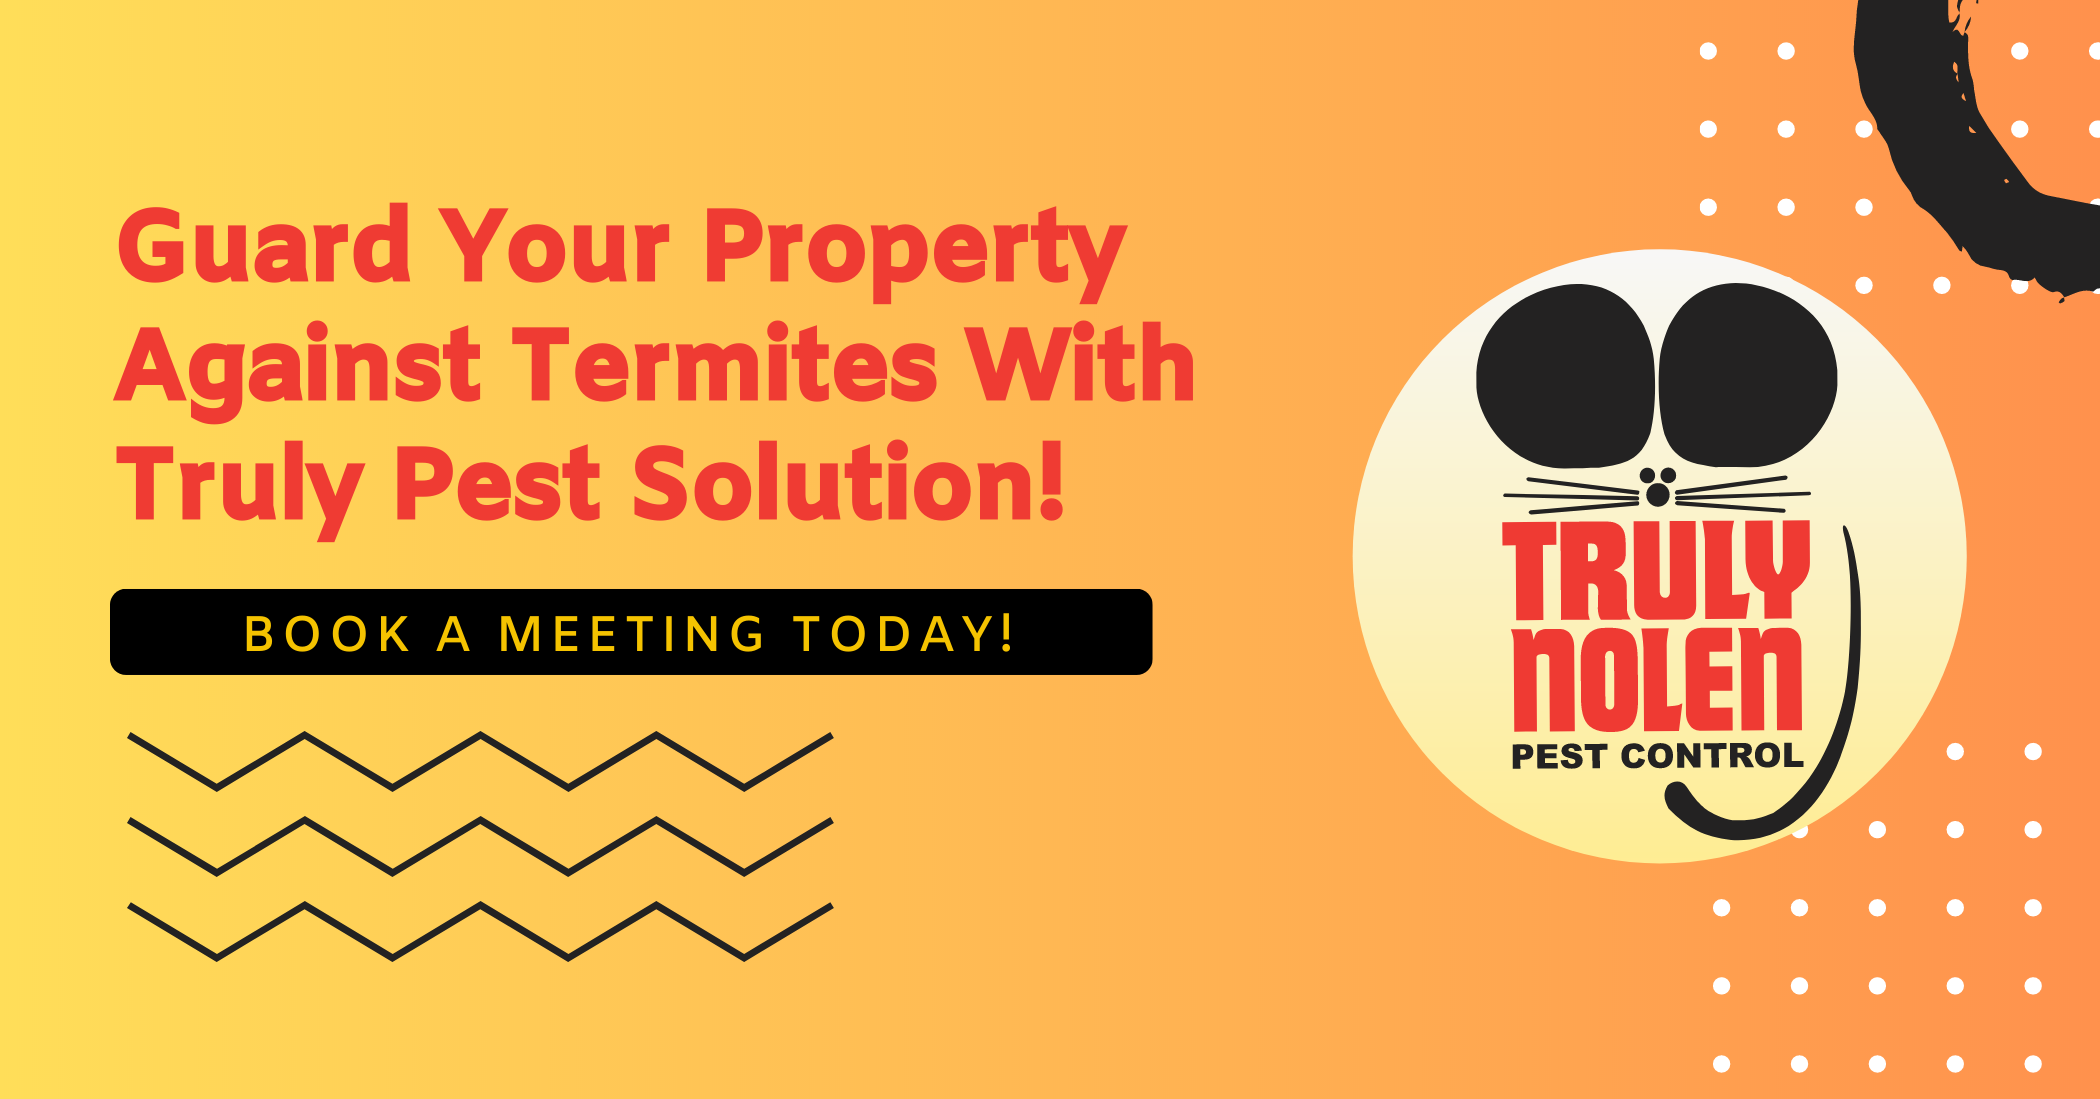 Guard-Your-Property-Against-Termites-With-Truly-Pest-Solution_